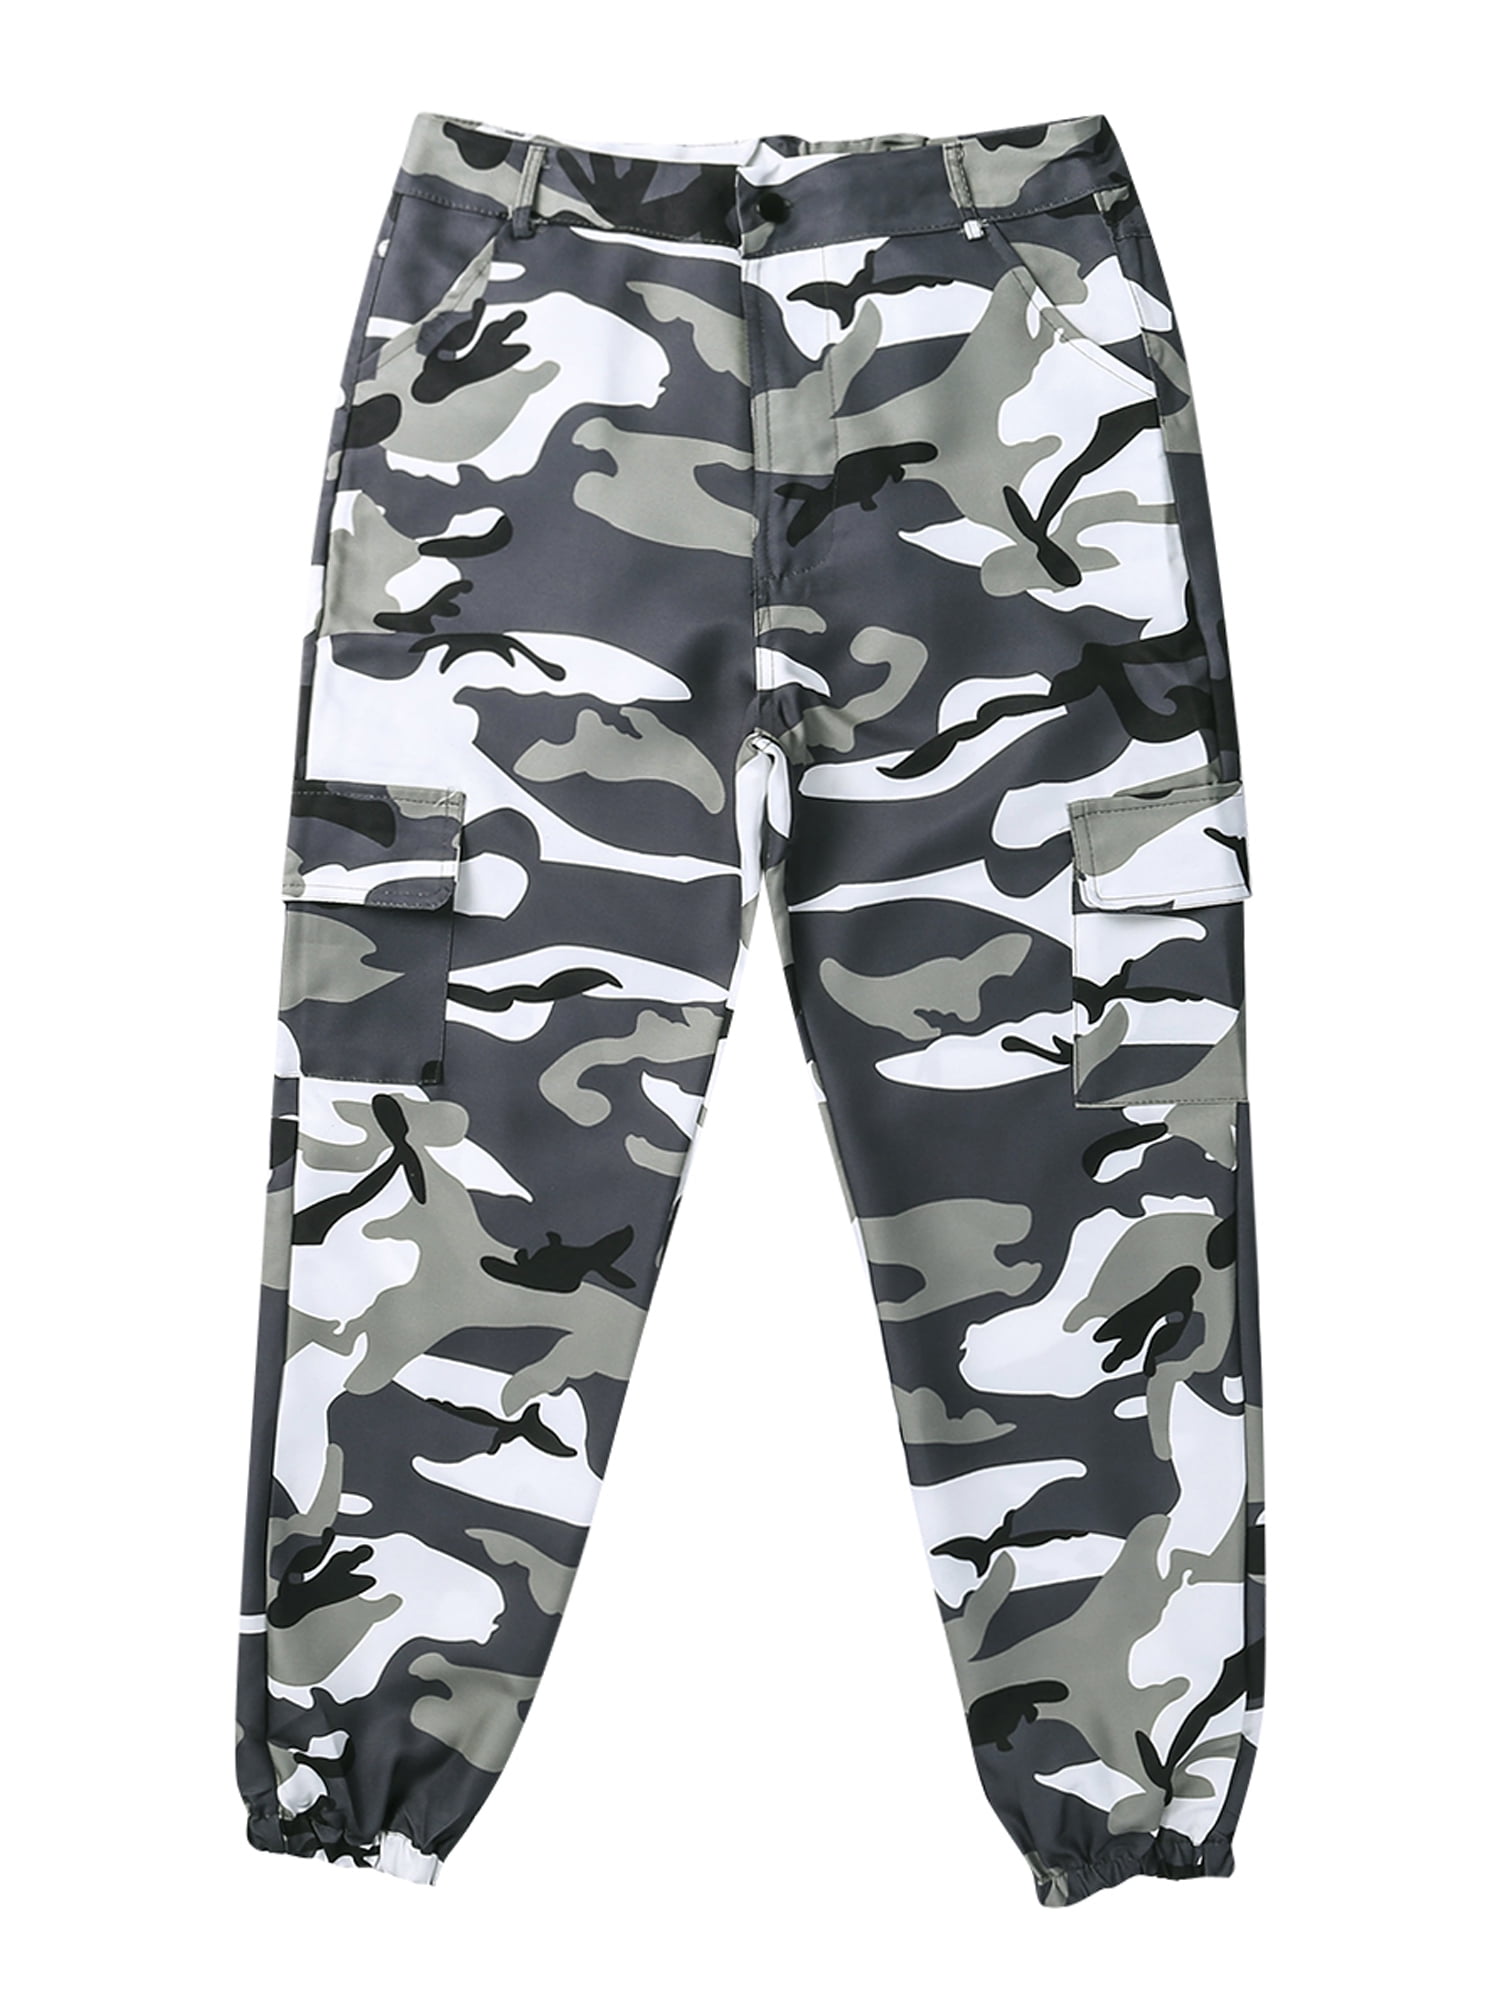 FINELOOK New Womens Camo Cargo Trousers Casual Loose Pants Military ...